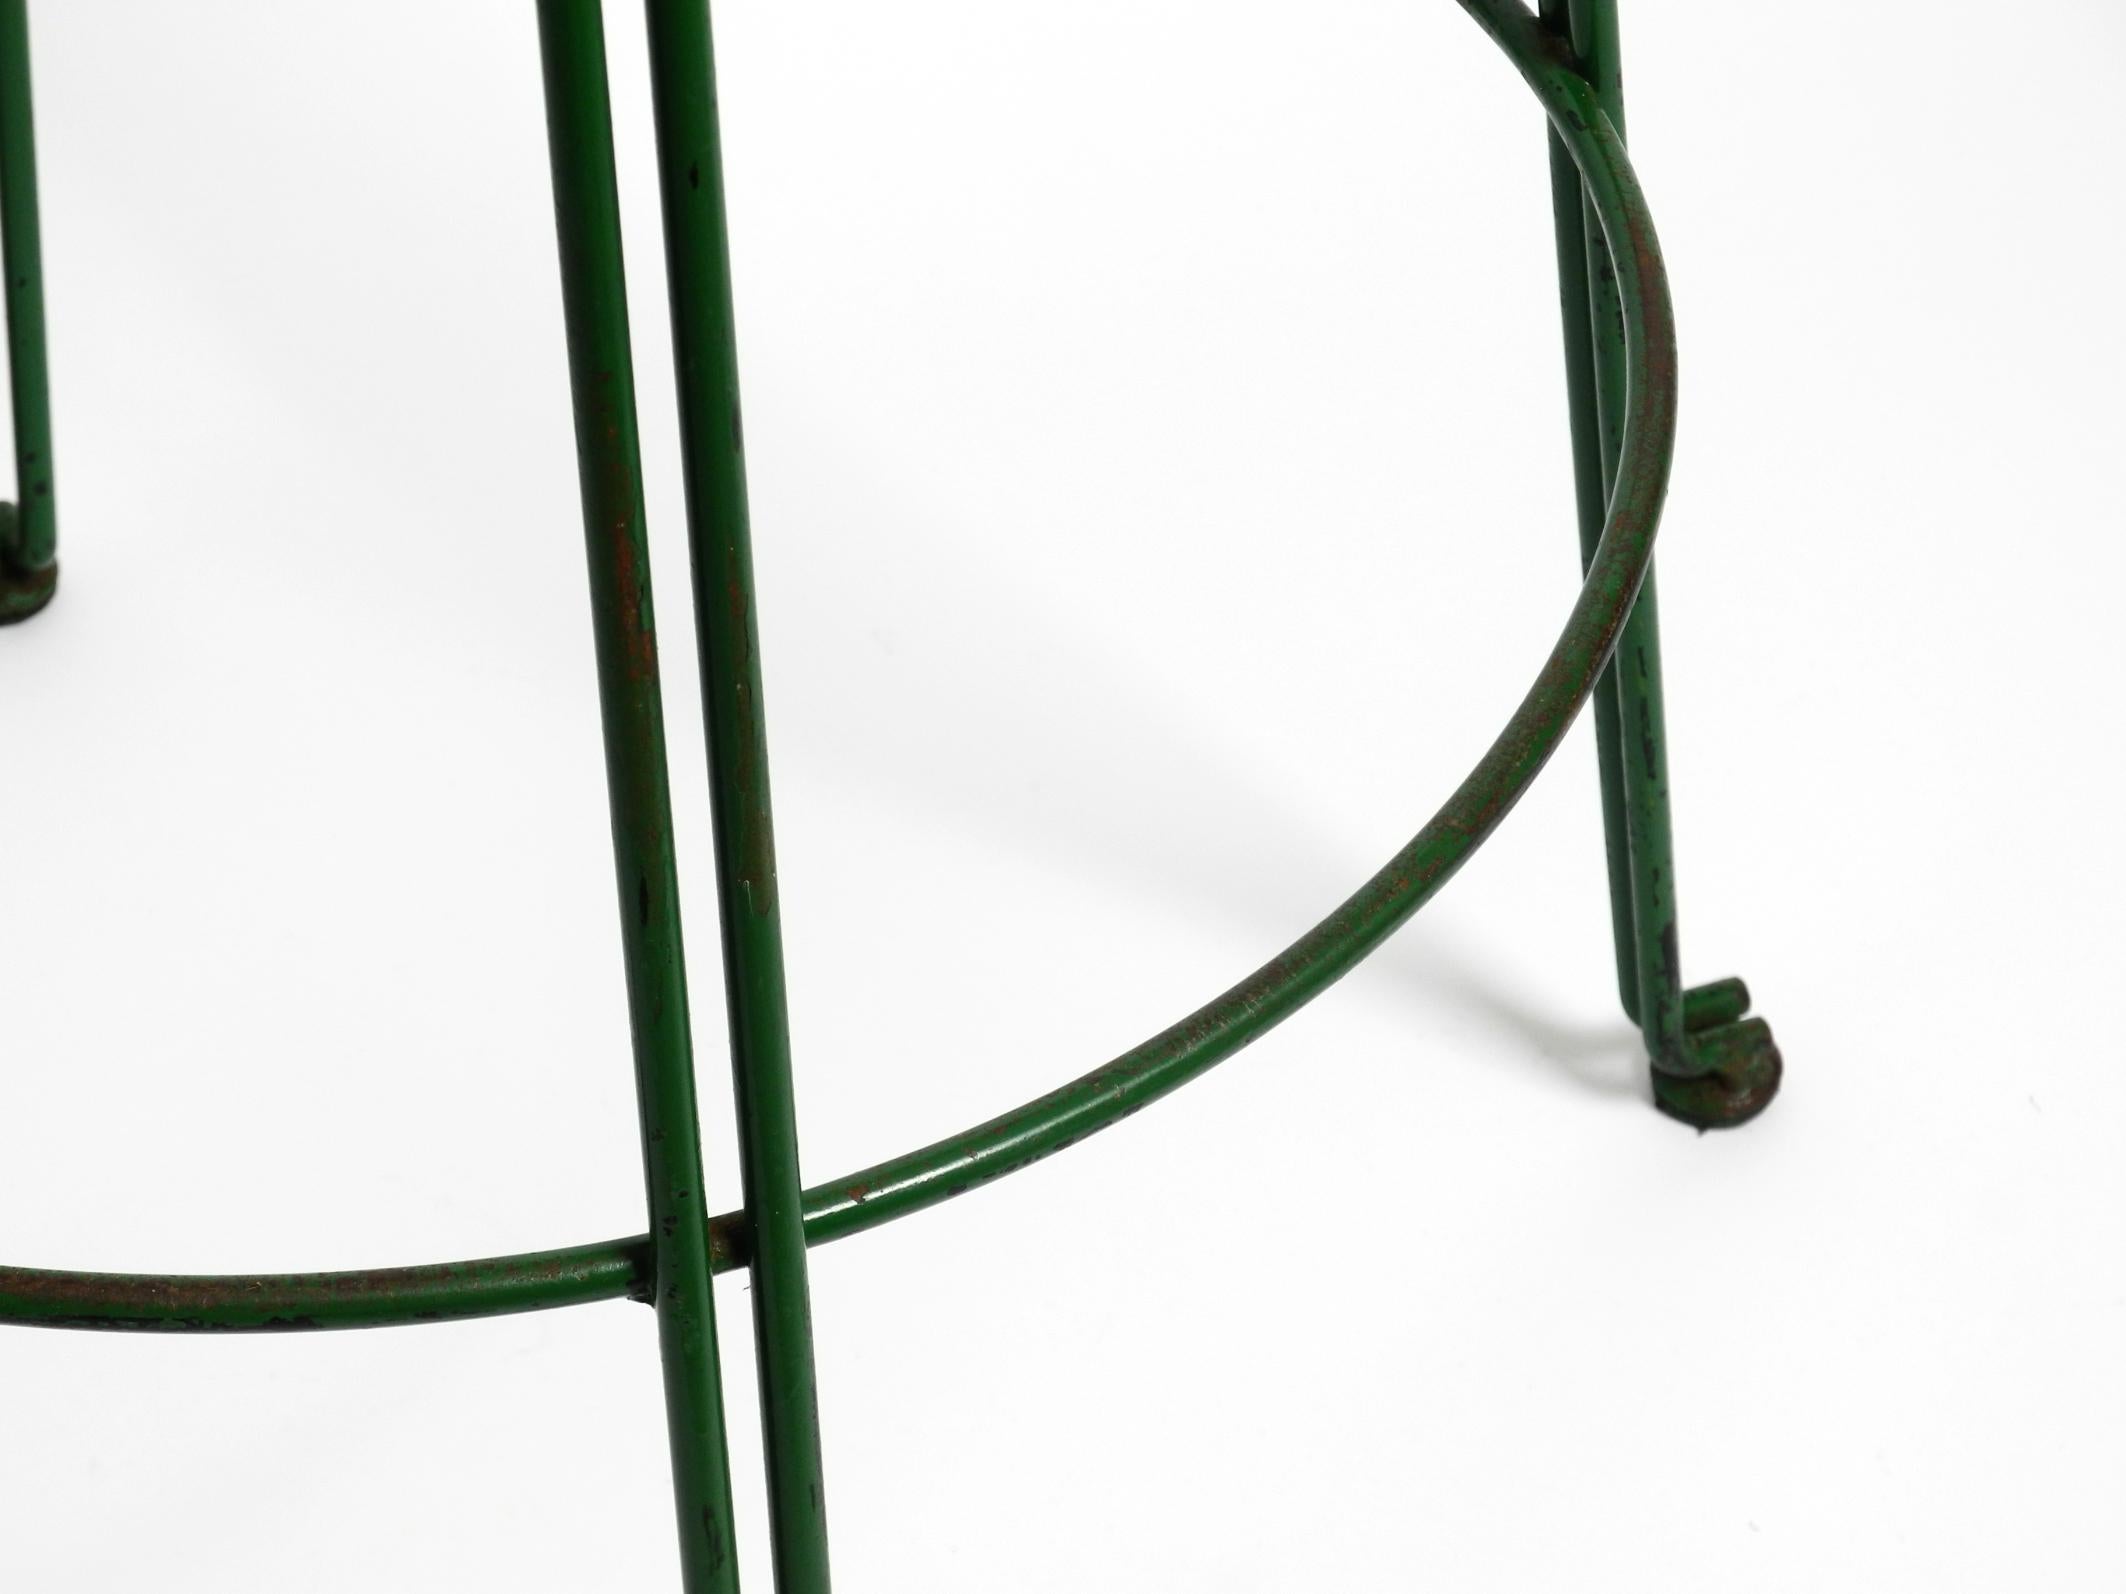 Italian 1960s bar stool made of green painted metal with perforated metal seat For Sale 3